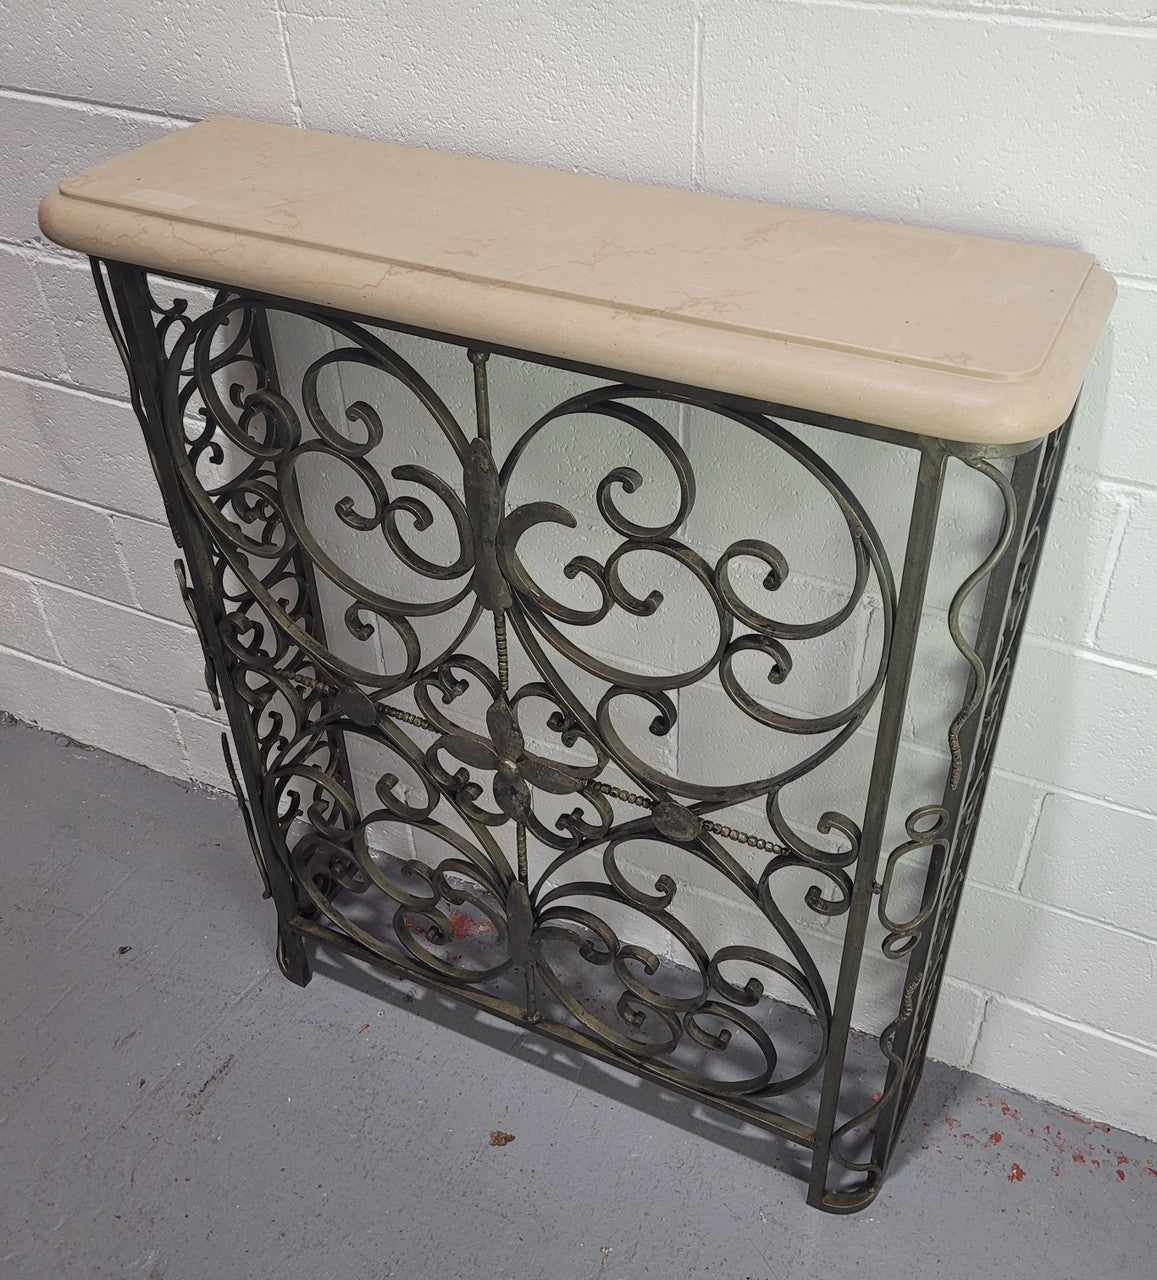 Stunning Art Deco wrought iron and marble top console table. It has amazing decorative iron work at the bottom and a beautiful marble top. It is in good original detailed condition.